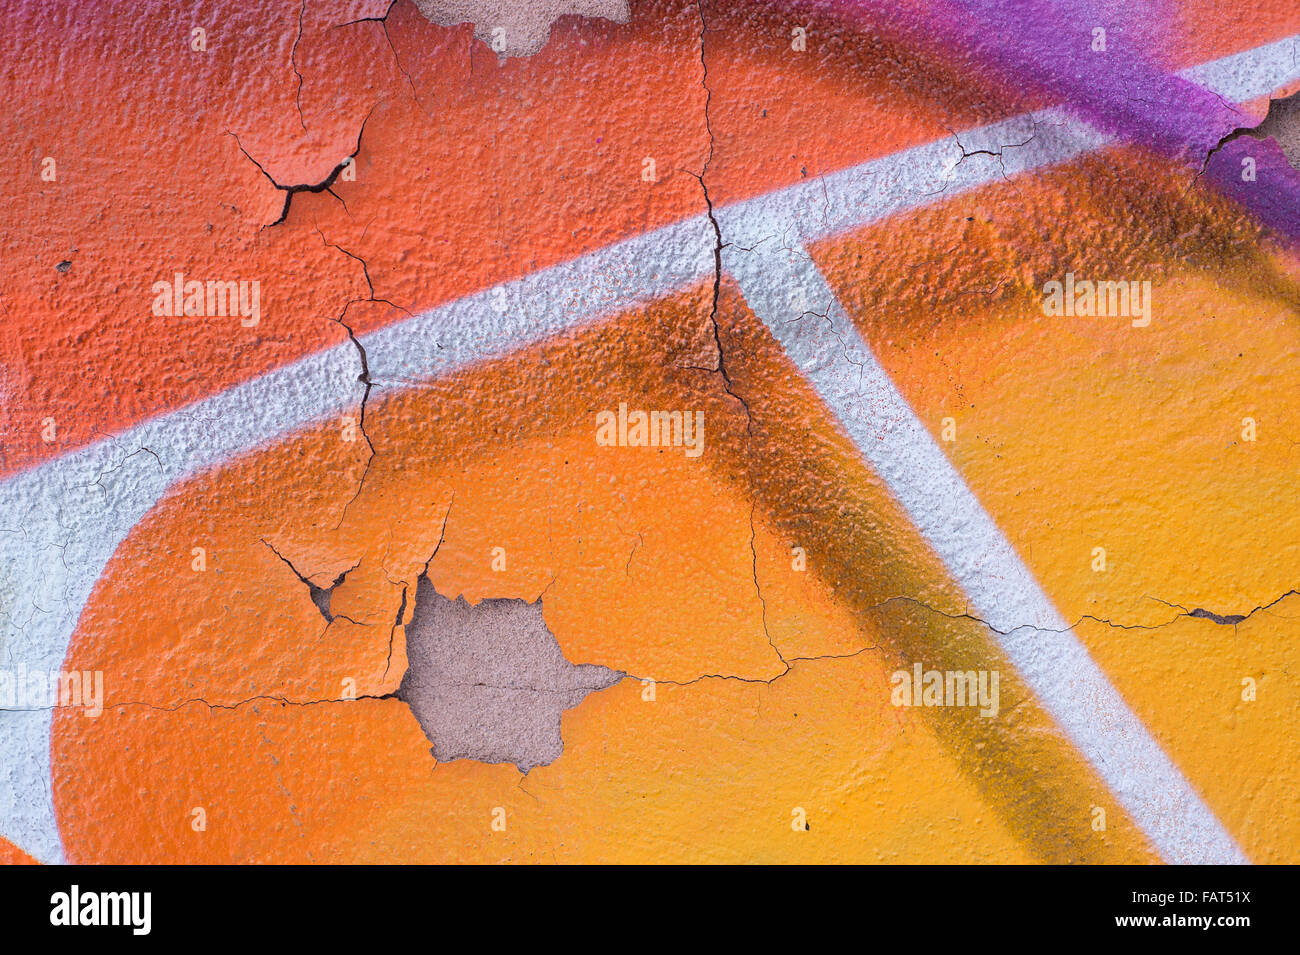 Closeup of a peeling and cracked wall with orange violet, and white spray drawings Stock Photo